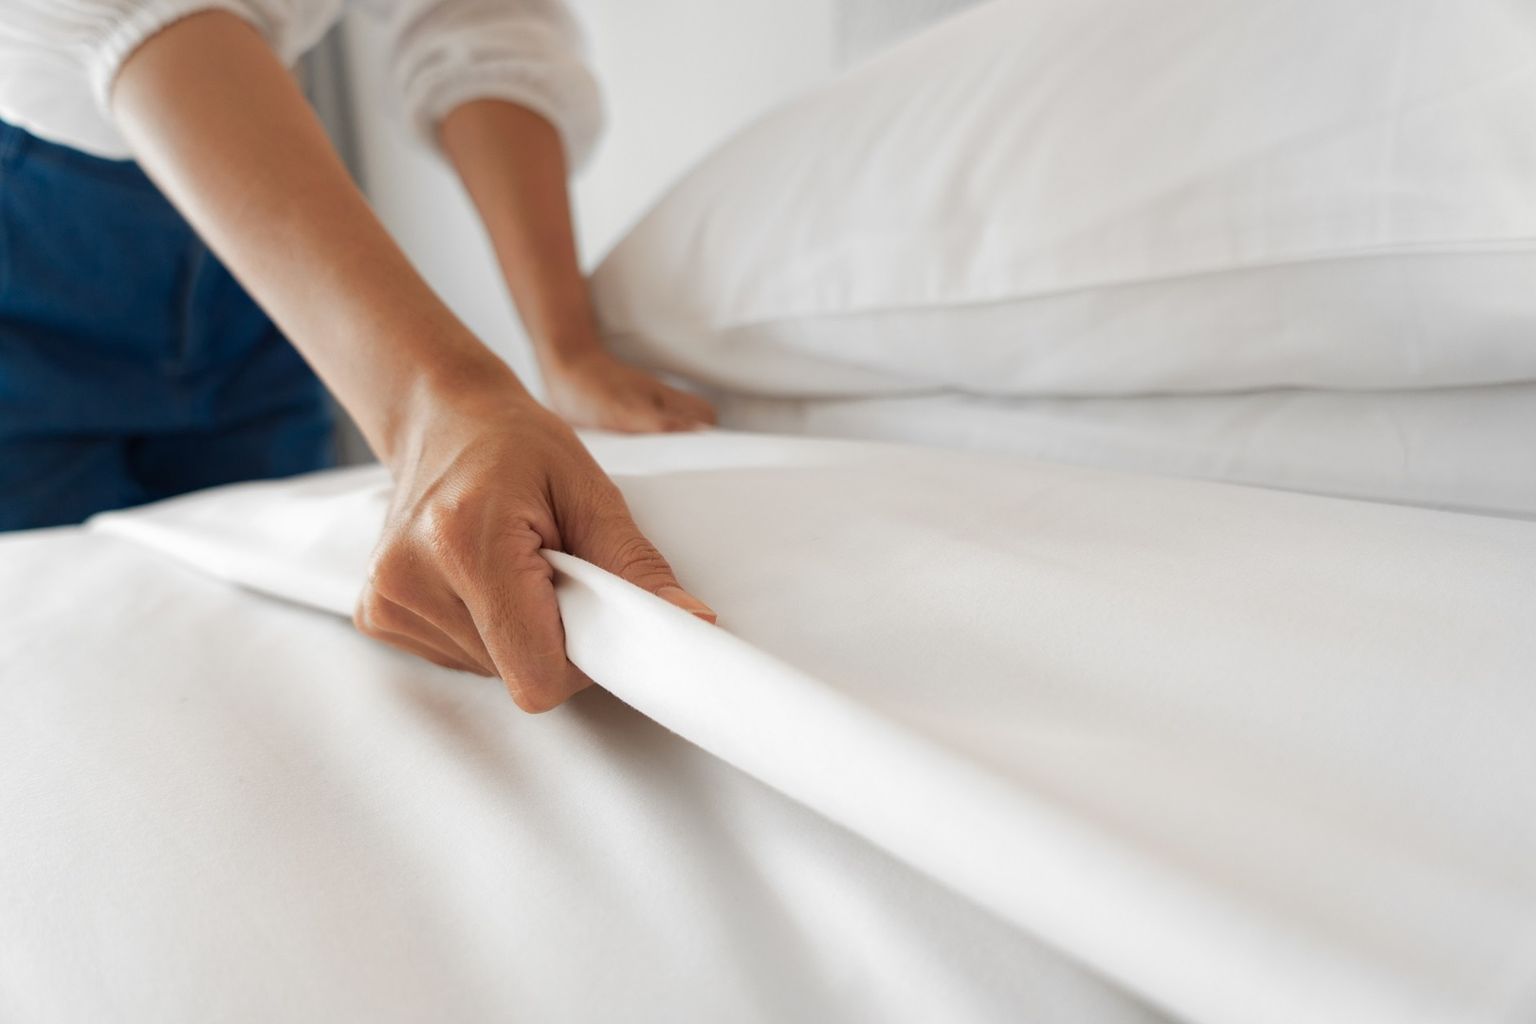 A person covers a bed. You can see only the arms and part of the bed.